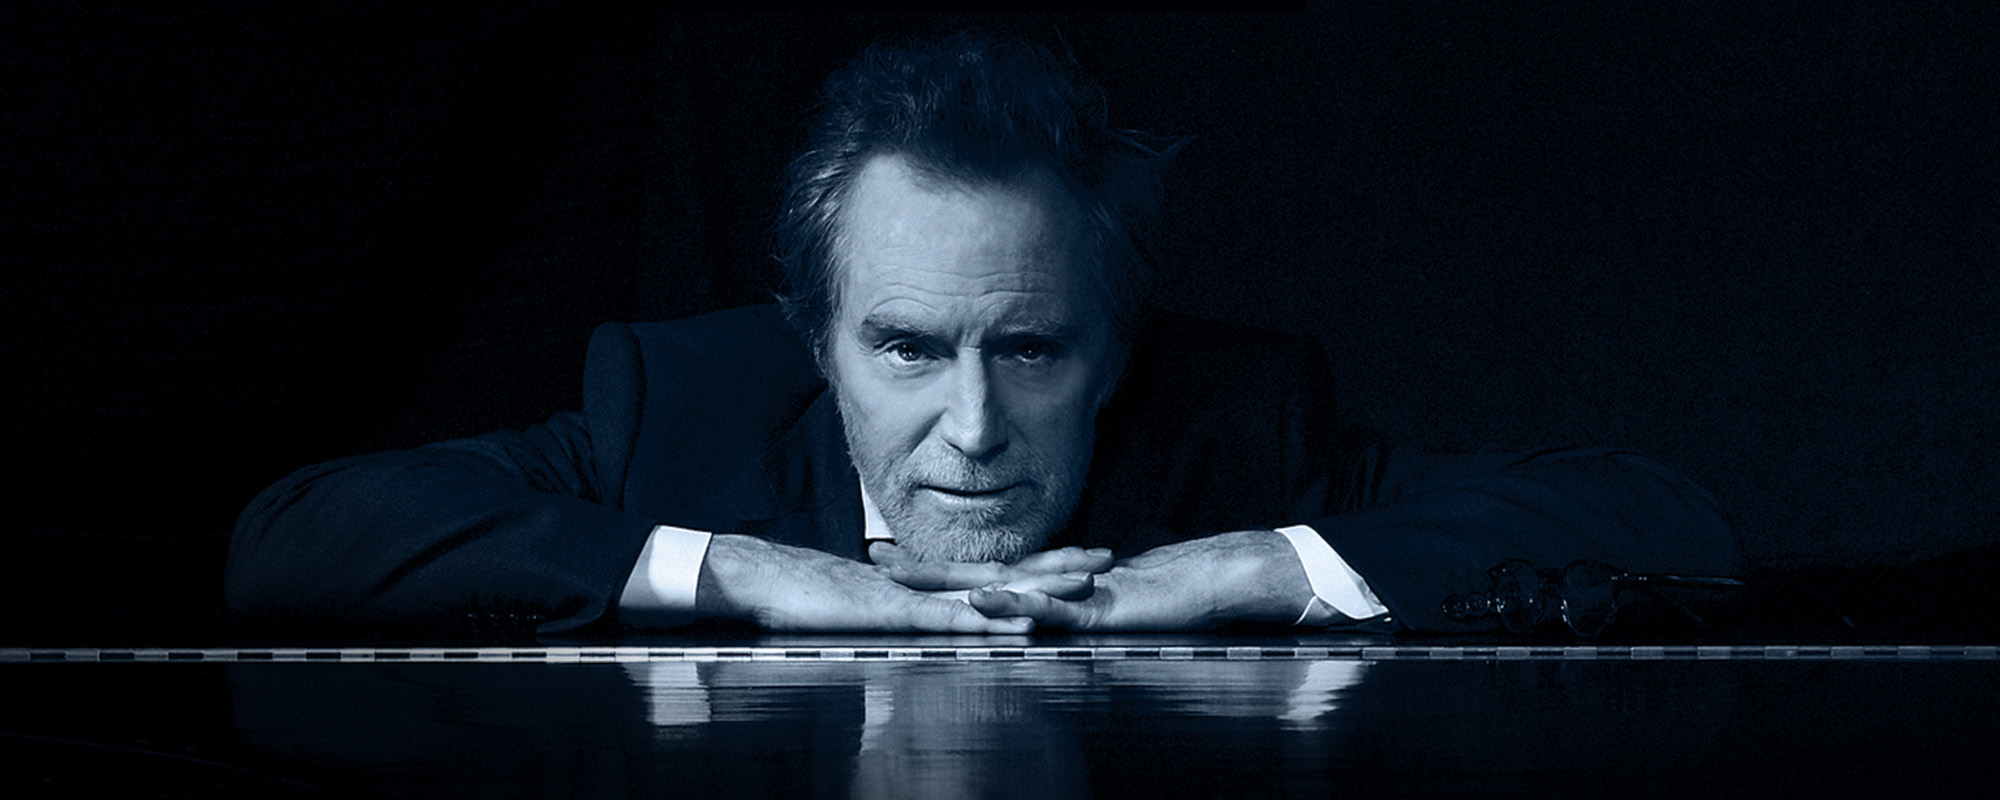 Off The Record: Catching Up with J. D. Souther